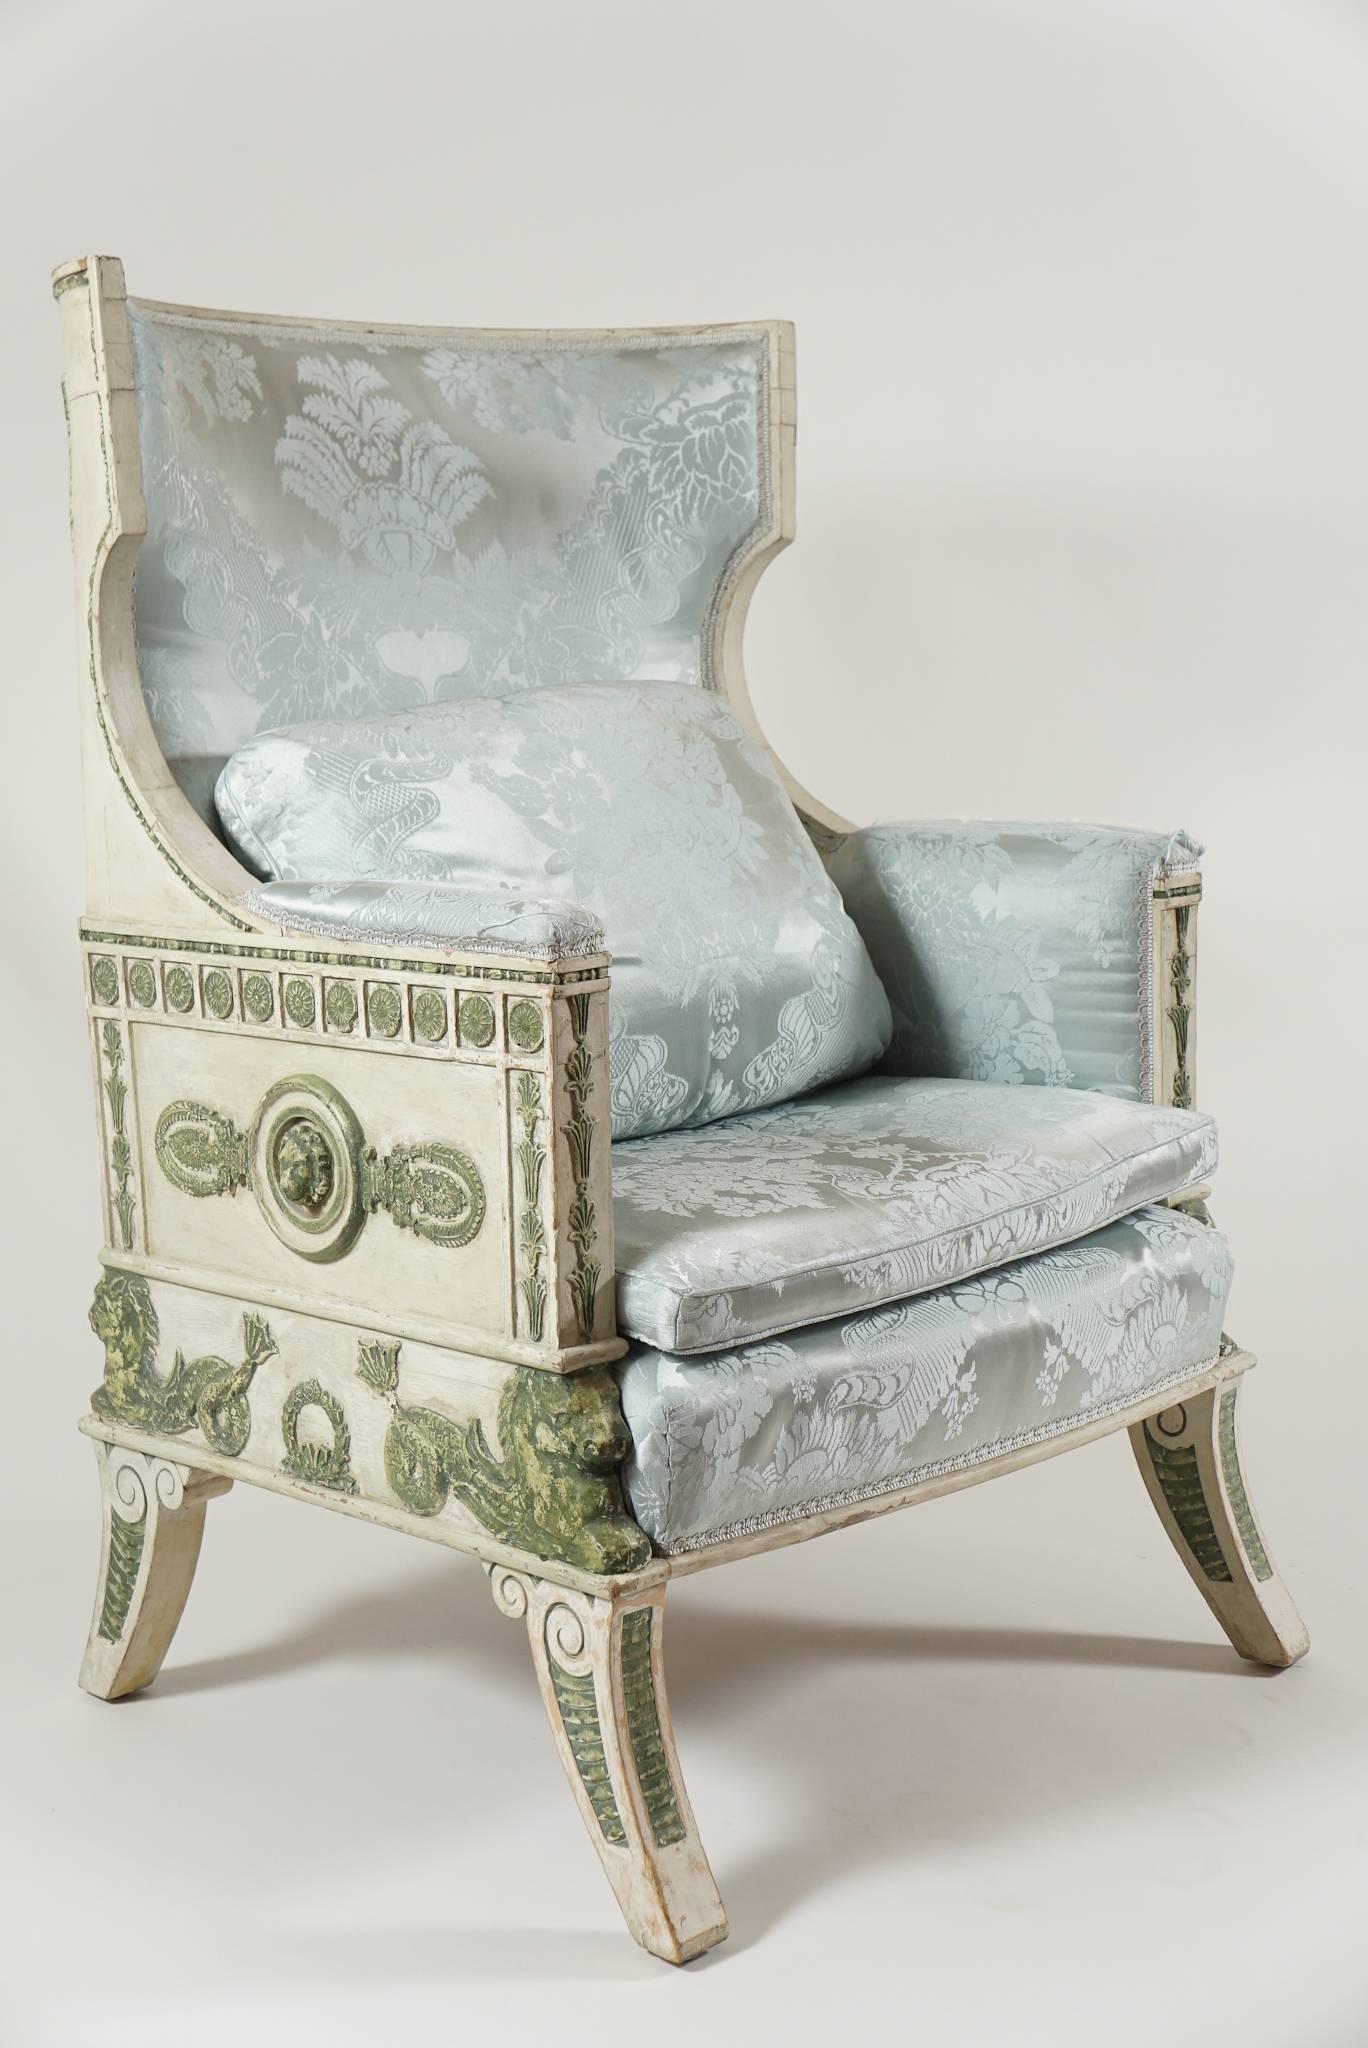 A rare, exceptional, and visually dynamic Baltic Empire style bergere of neoclassical form having polychrome painted carved wood frame with klismos form upholstered 'wing' backrest, armrests, interior-sides, squab cushion, and seat, and all-around